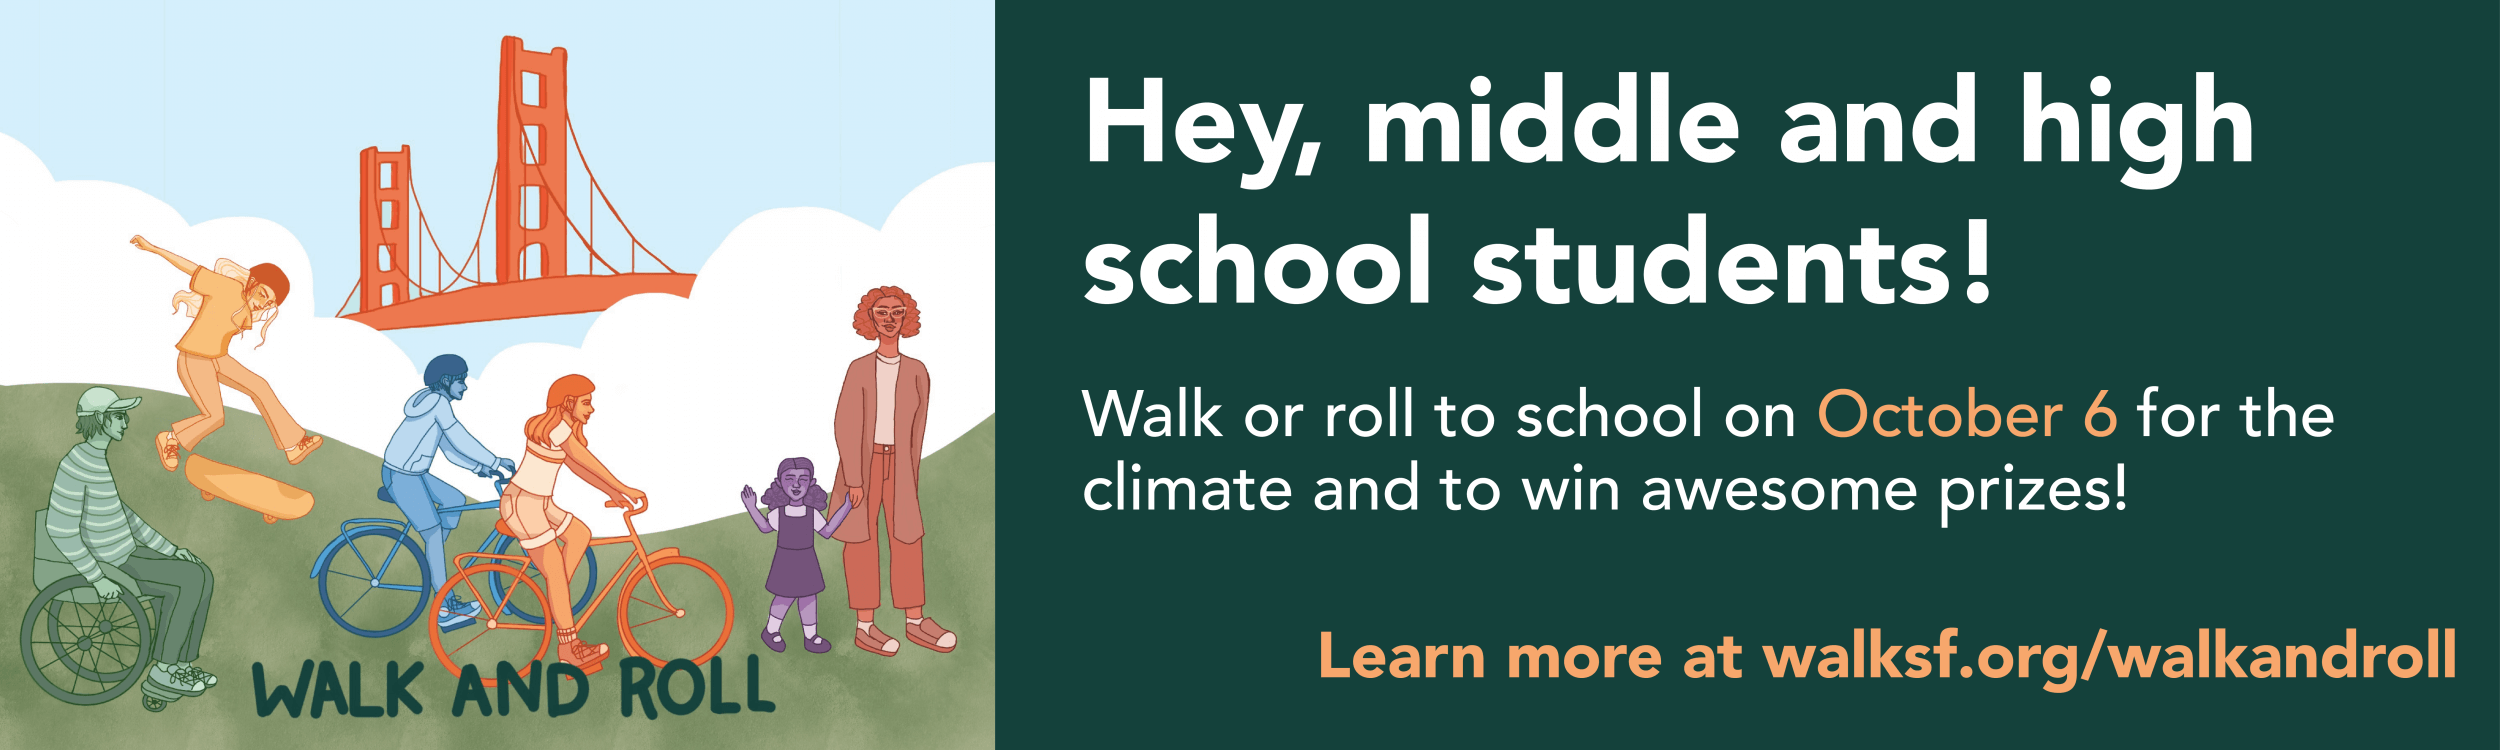 Walk & Roll to School Day: Middle and High School Students